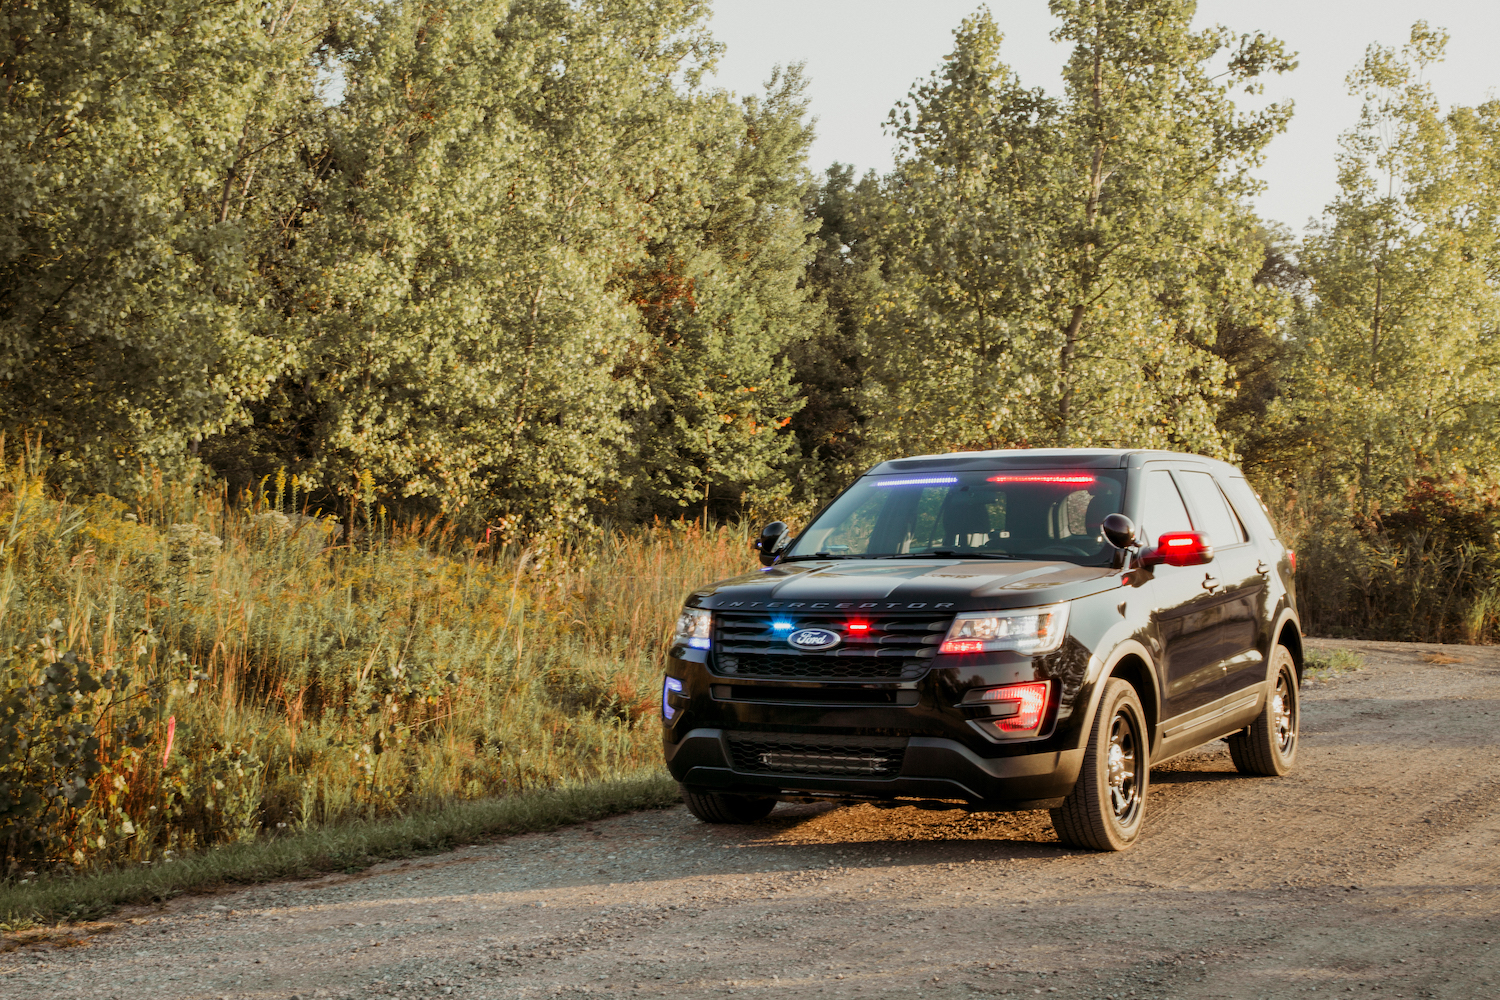 This Ford Police Interceptor Utility is a very popular model for unmarked police cars | Ford Motor Company